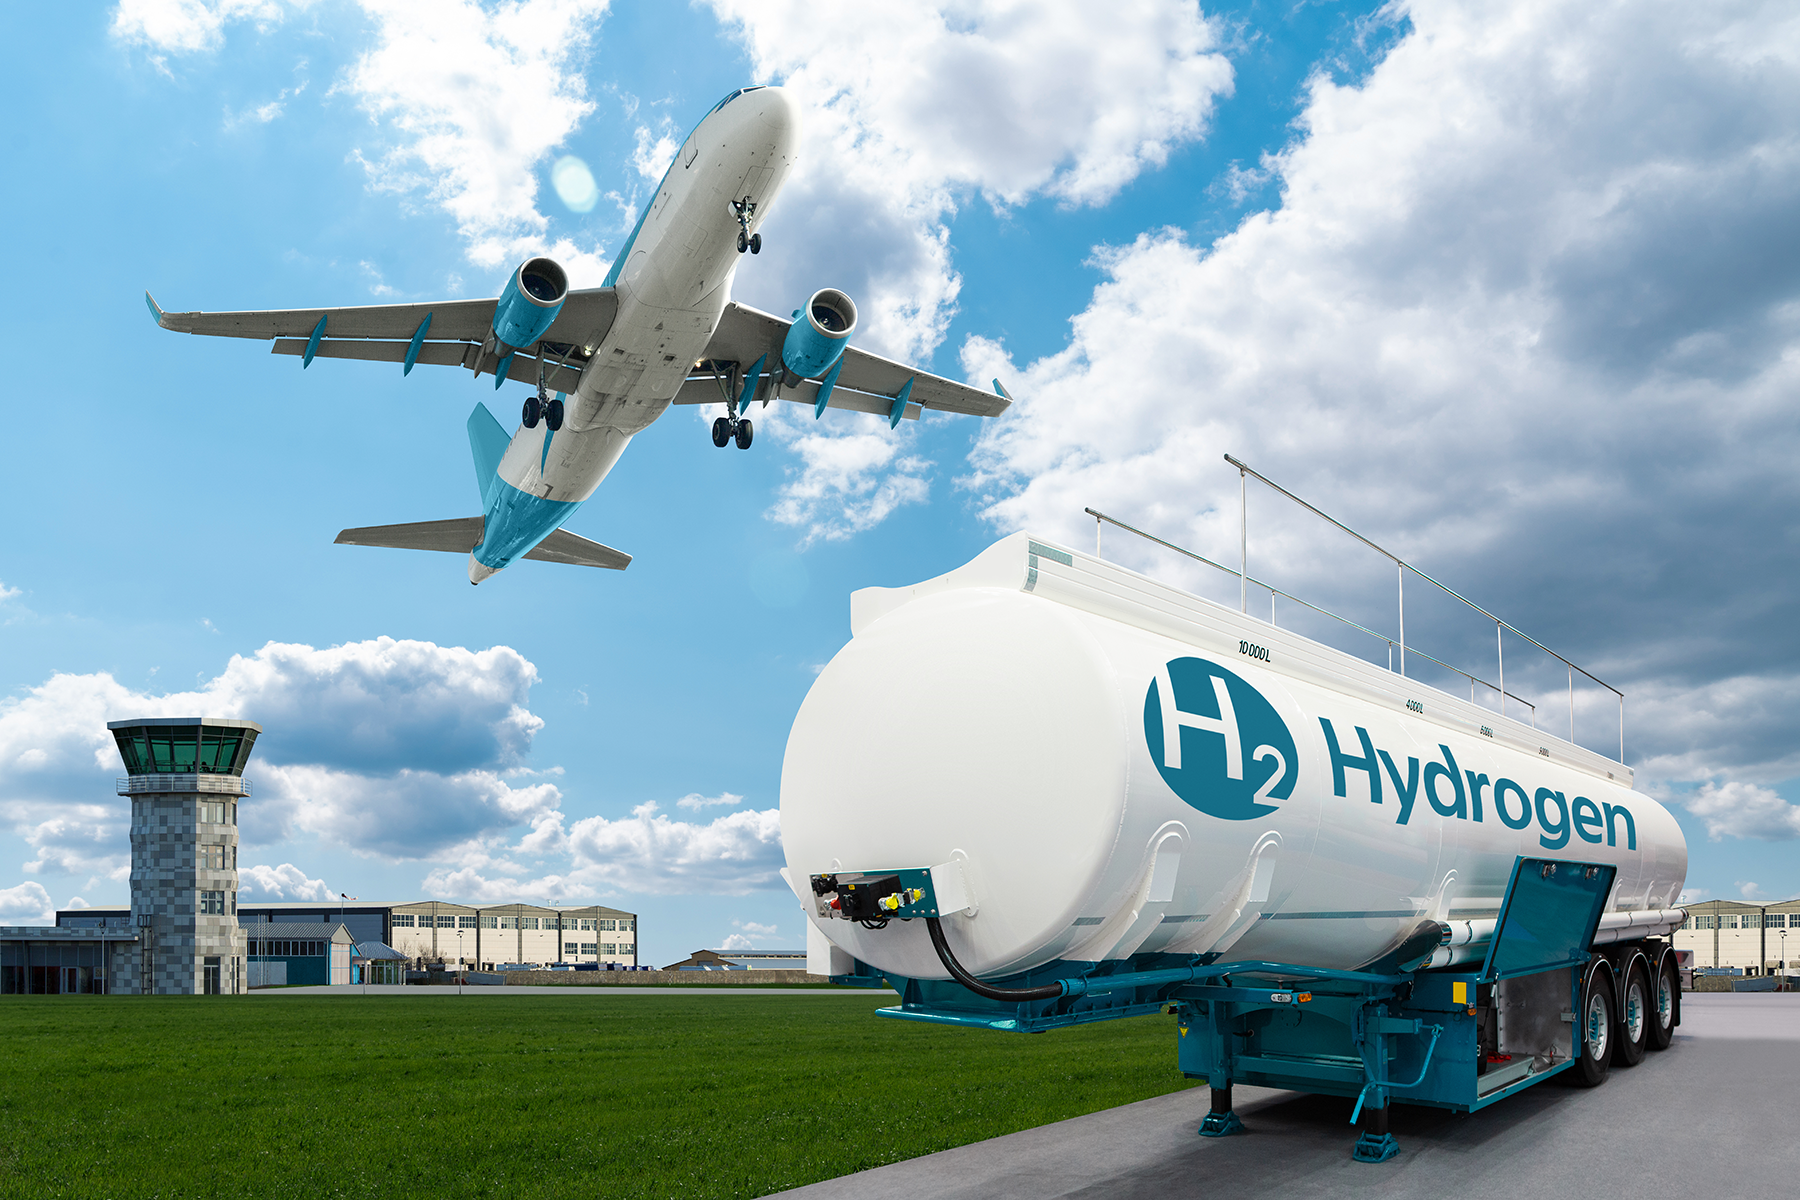 Airplane and hydrogen tank trailer on the background of airport.